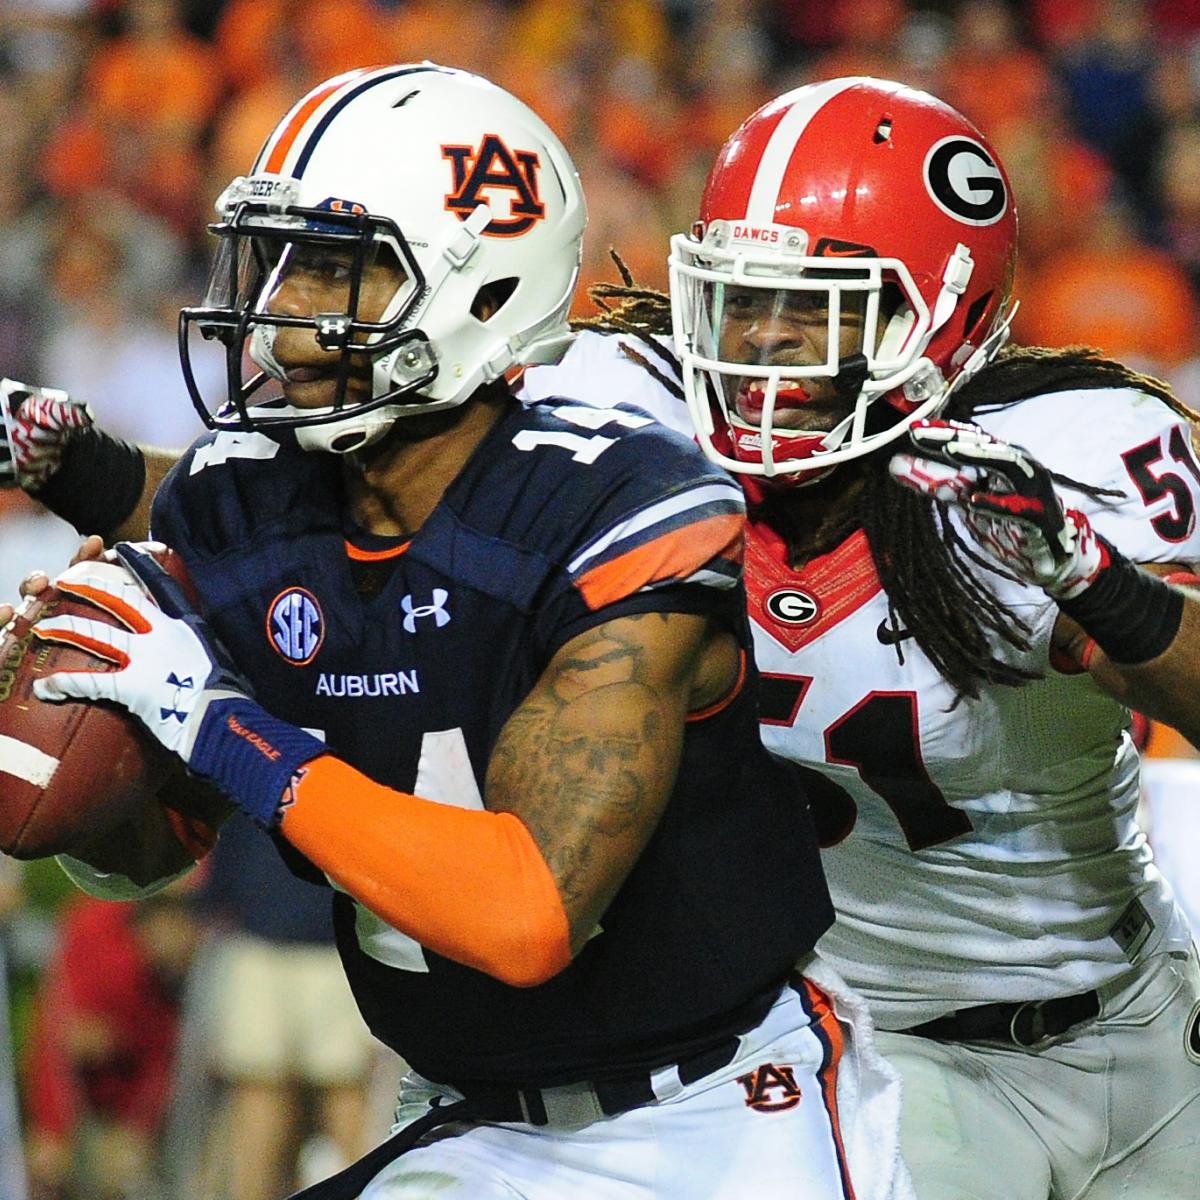 Auburn vs. Complete Game Preview News, Scores, Highlights